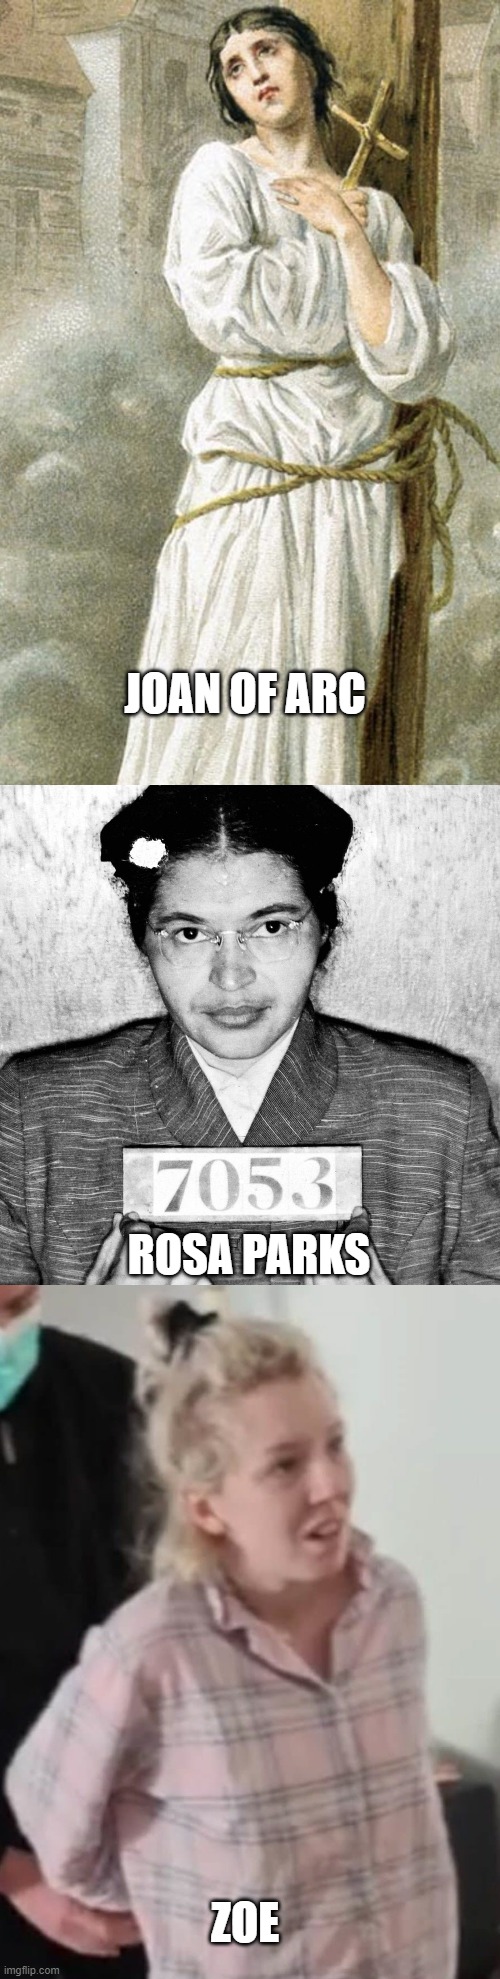 Freedom fighters | JOAN OF ARC; ROSA PARKS; ZOE | image tagged in freedom | made w/ Imgflip meme maker